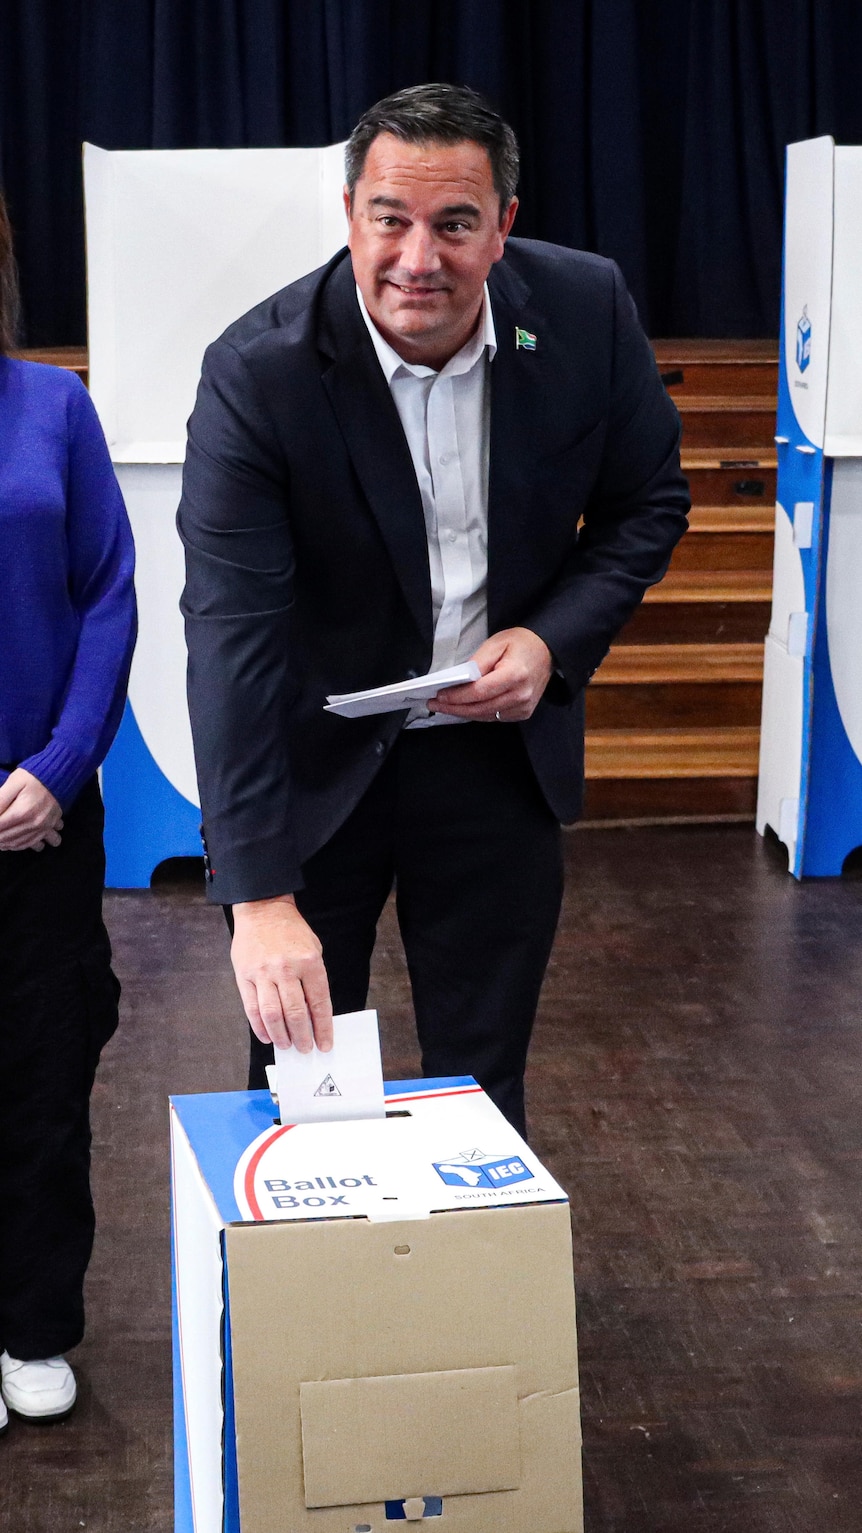 A middle-aged white South African man in a suit smiles as he leans down to place a folded piece of paper in a ballot box.